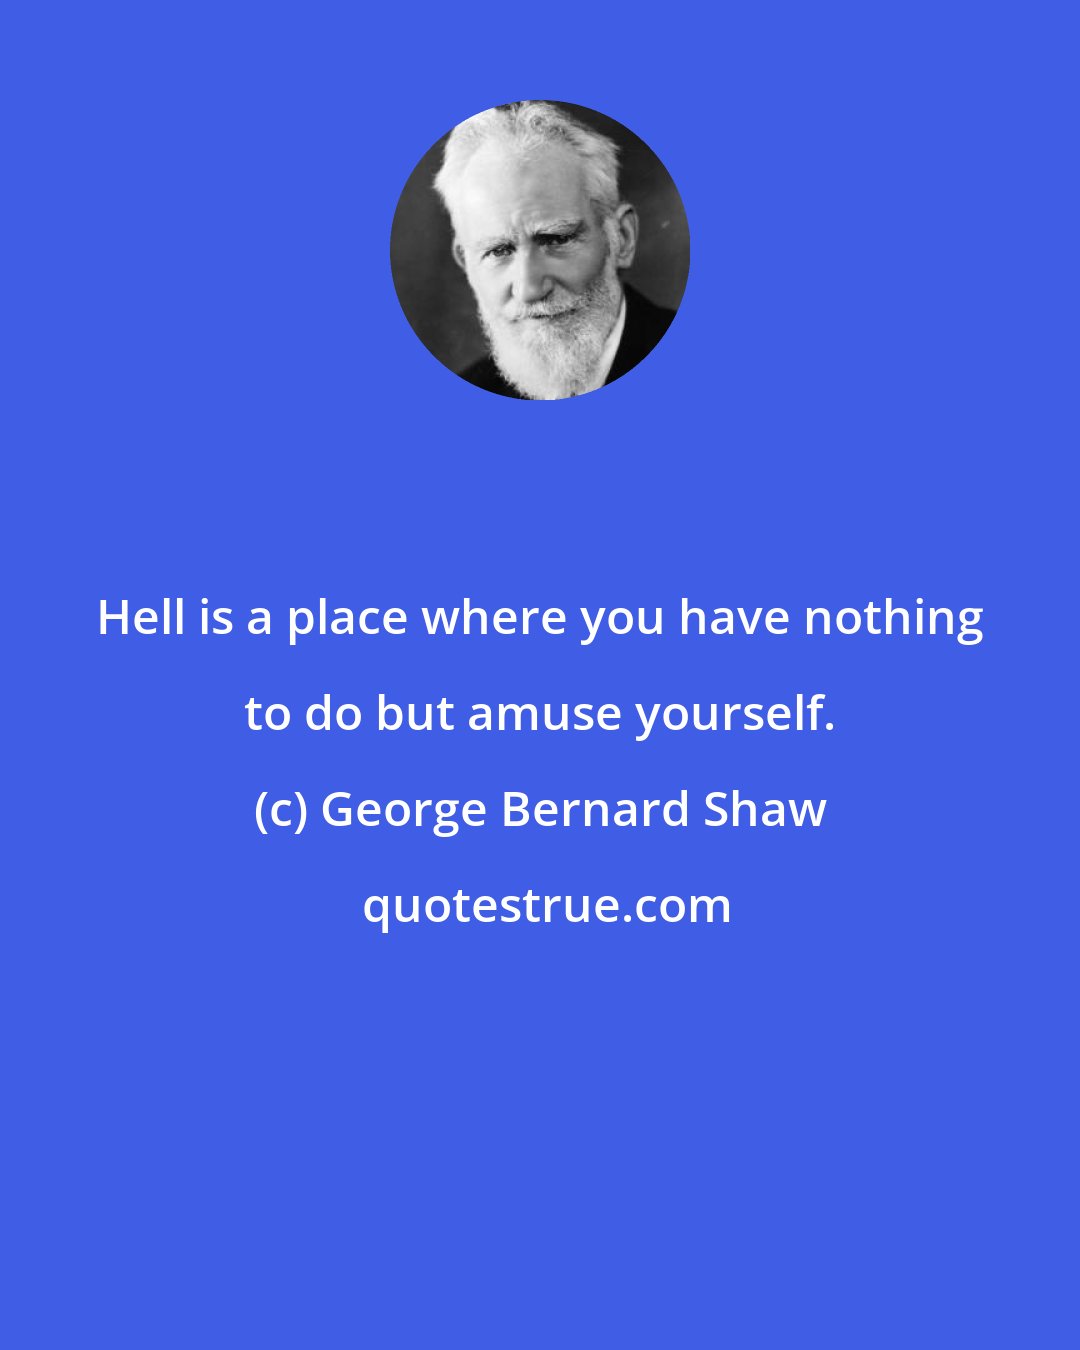 George Bernard Shaw: Hell is a place where you have nothing to do but amuse yourself.